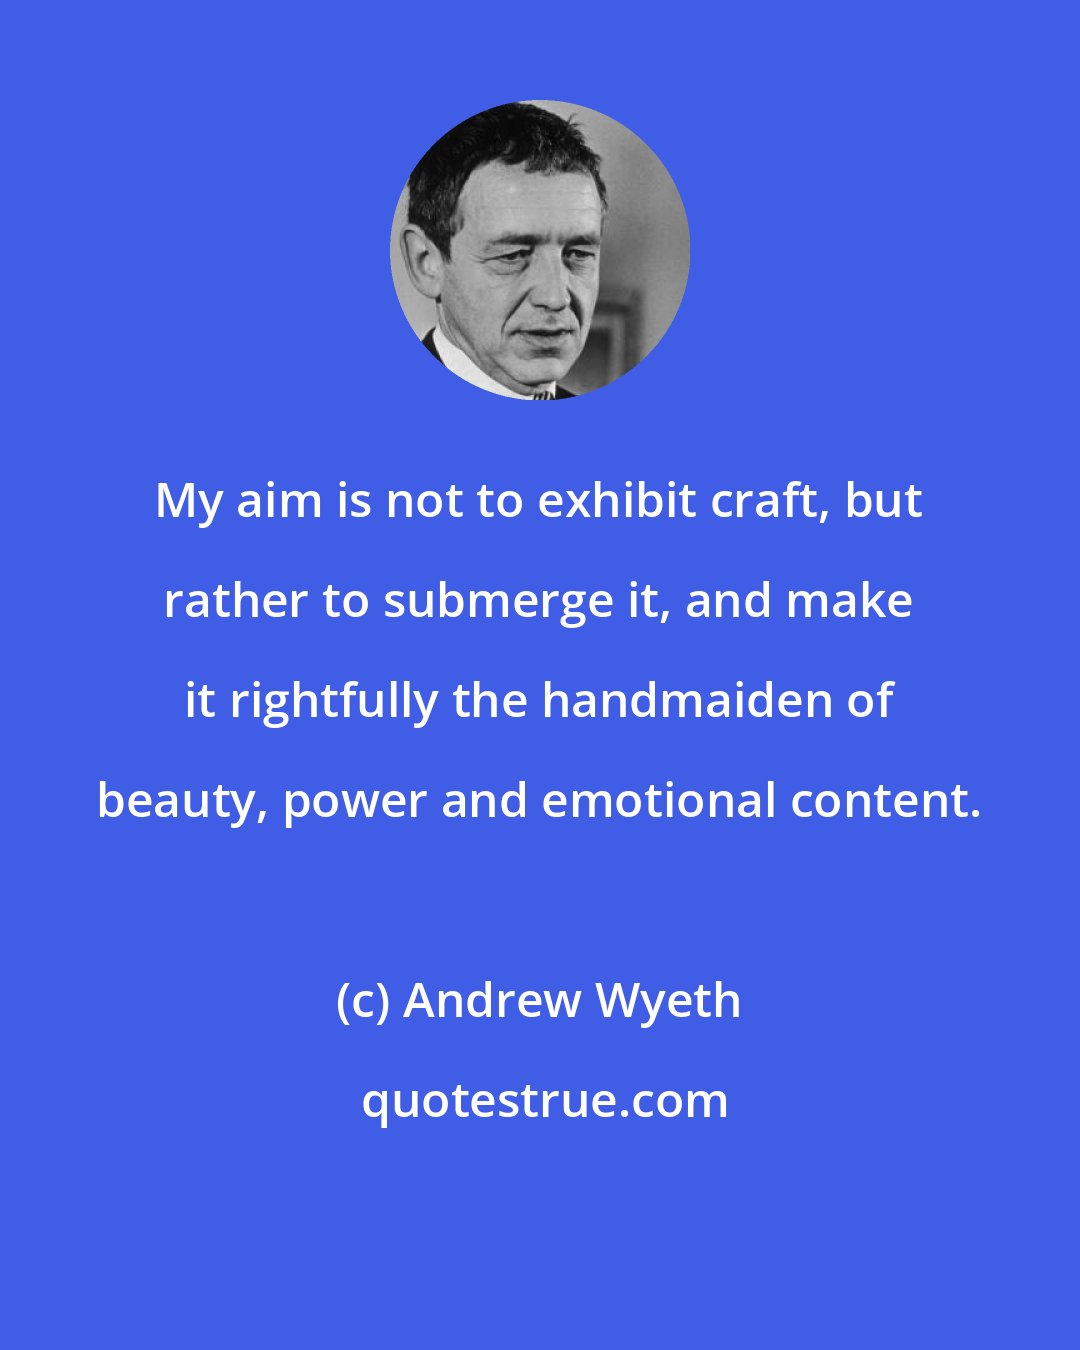 Andrew Wyeth: My aim is not to exhibit craft, but rather to submerge it, and make it rightfully the handmaiden of beauty, power and emotional content.